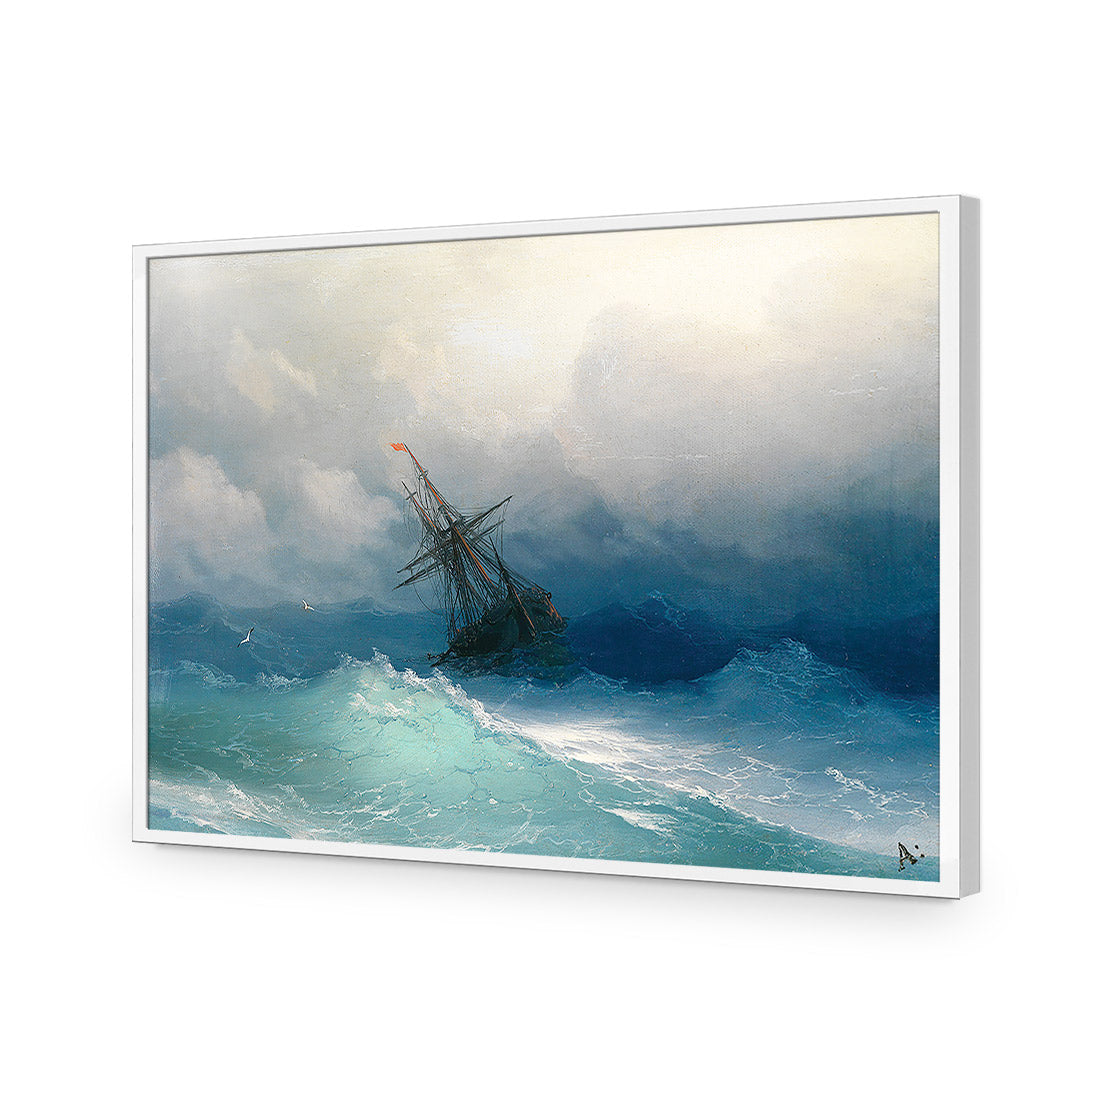 Caught In A Storm - Ivan Aivazovsky Acrylic Glass Art-Acrylic-Wall Art Design-Without Border-Acrylic - White Frame-45x30cm-Wall Art Designs